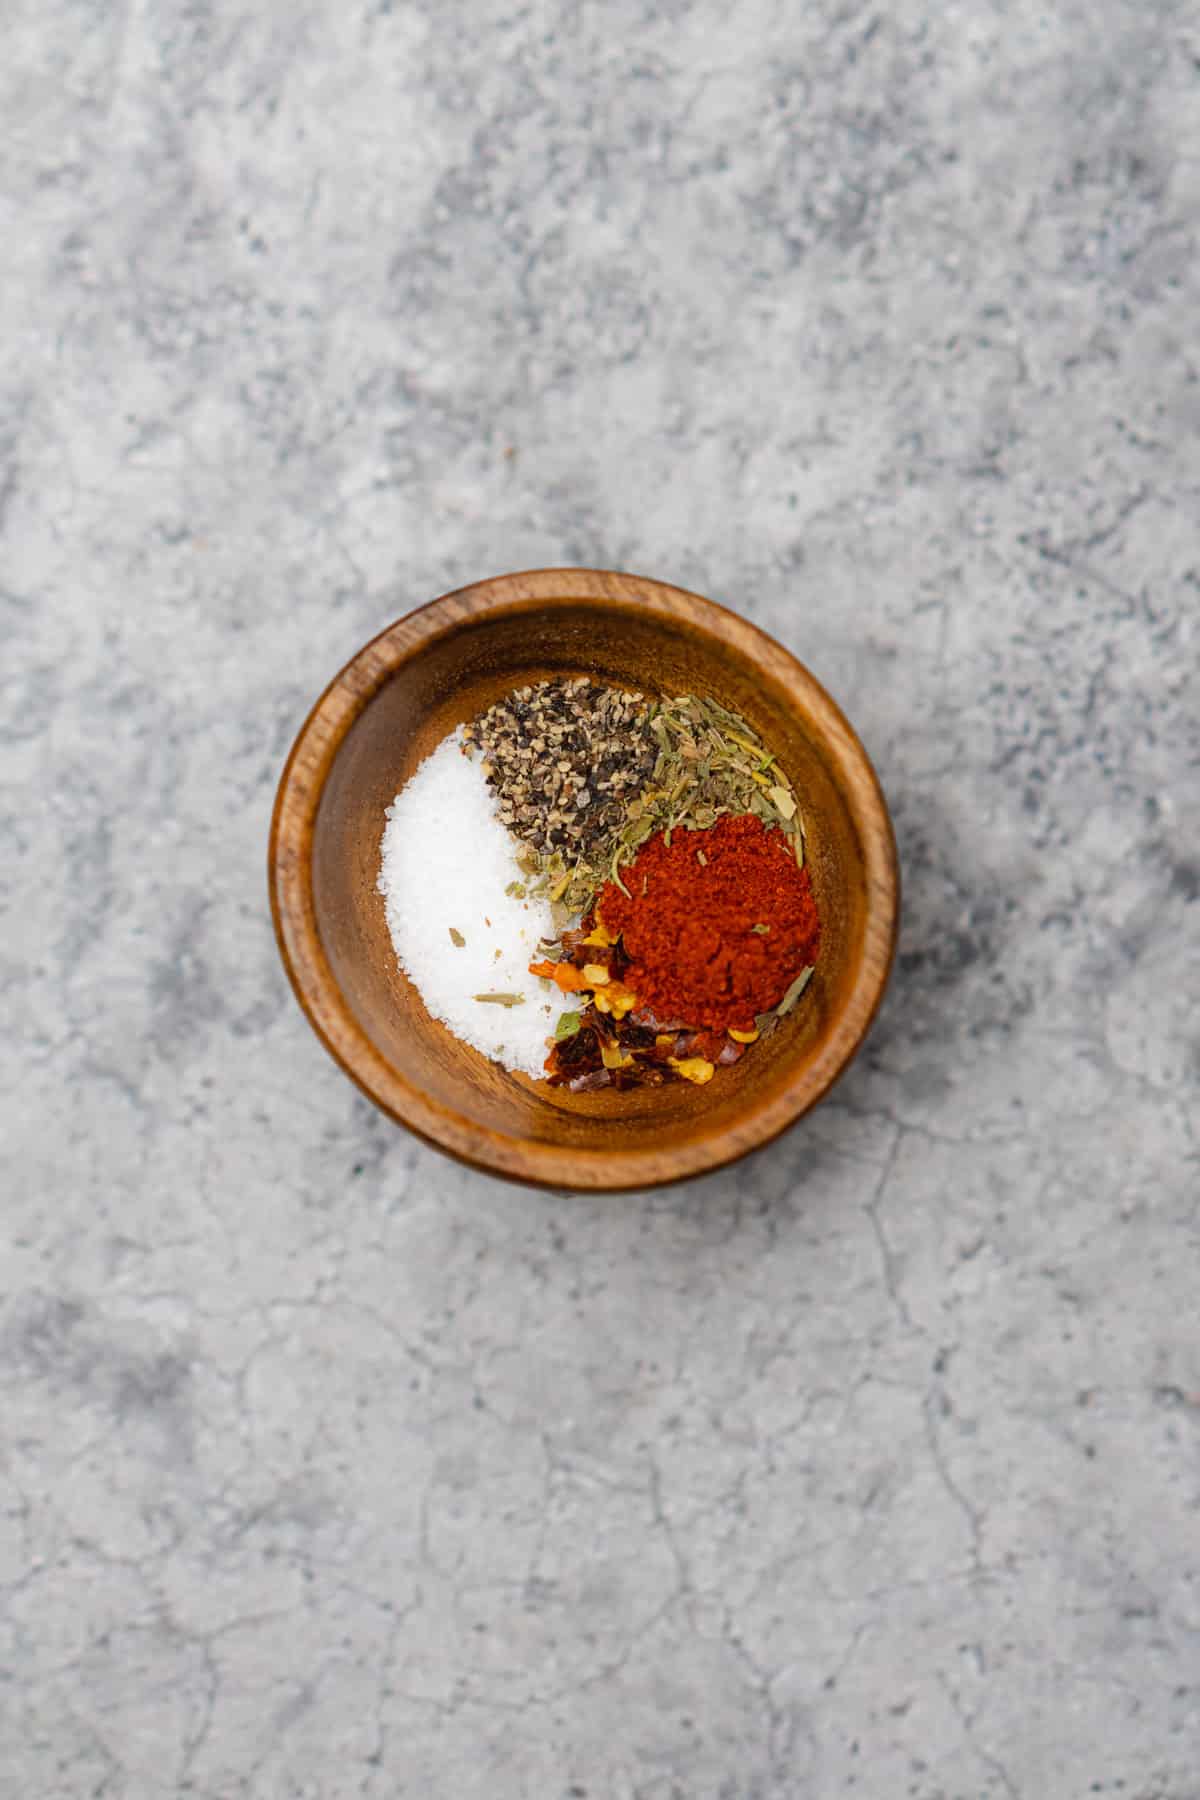 seasonings with salt pepper red pepper flakes italian seasonings and smoked paprika in a small wood dish